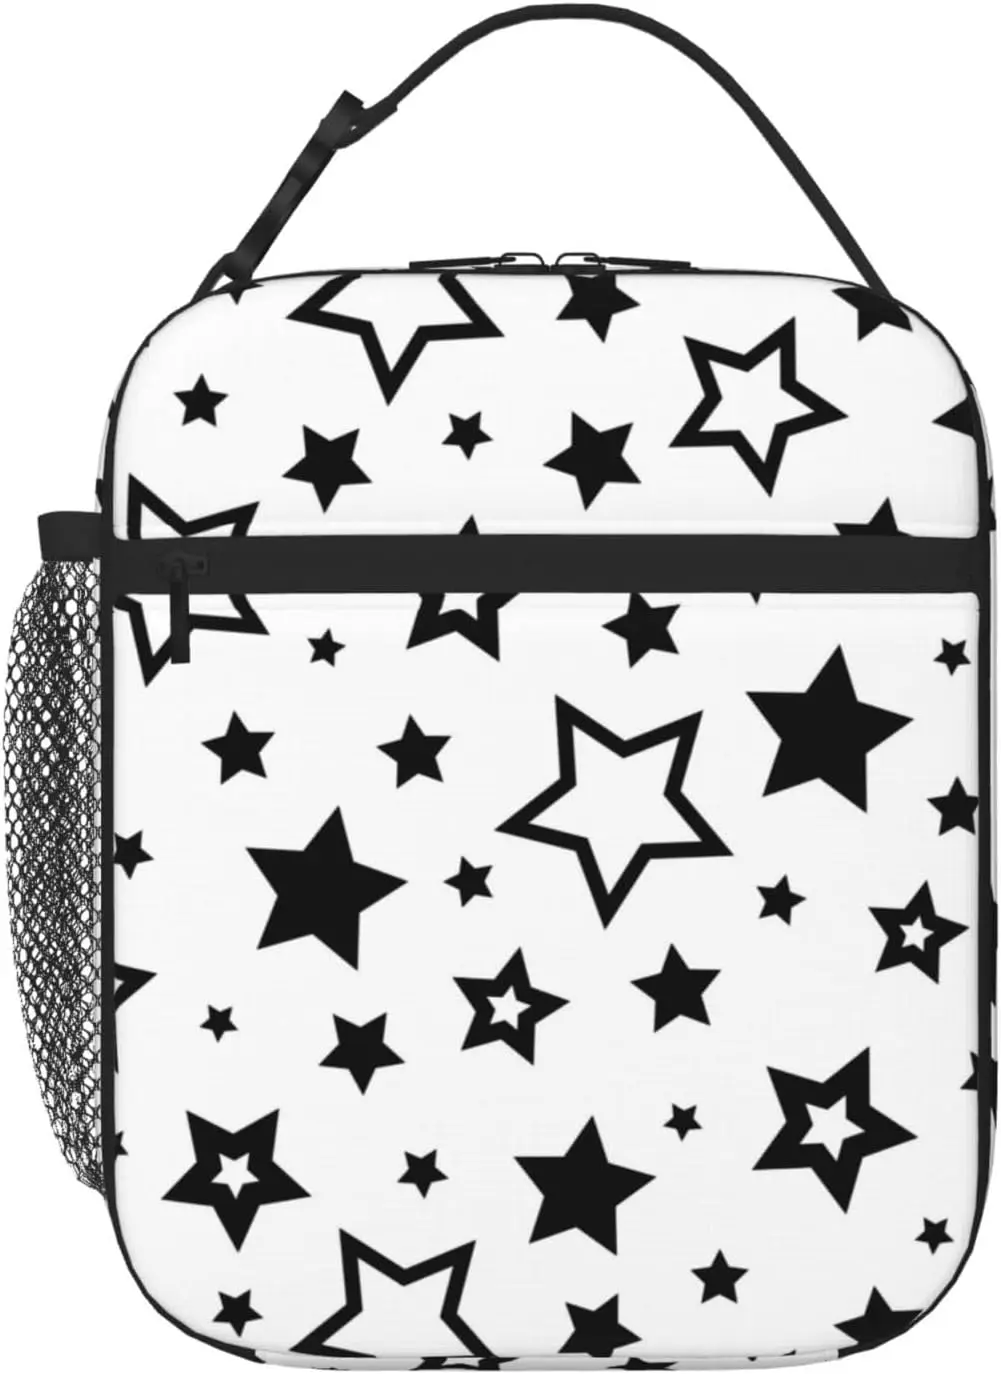 Black Stars In White Portable Lunch Bag Insulated Lunch Box Reusable Totes for Women Men Work Picnic Camping One Size